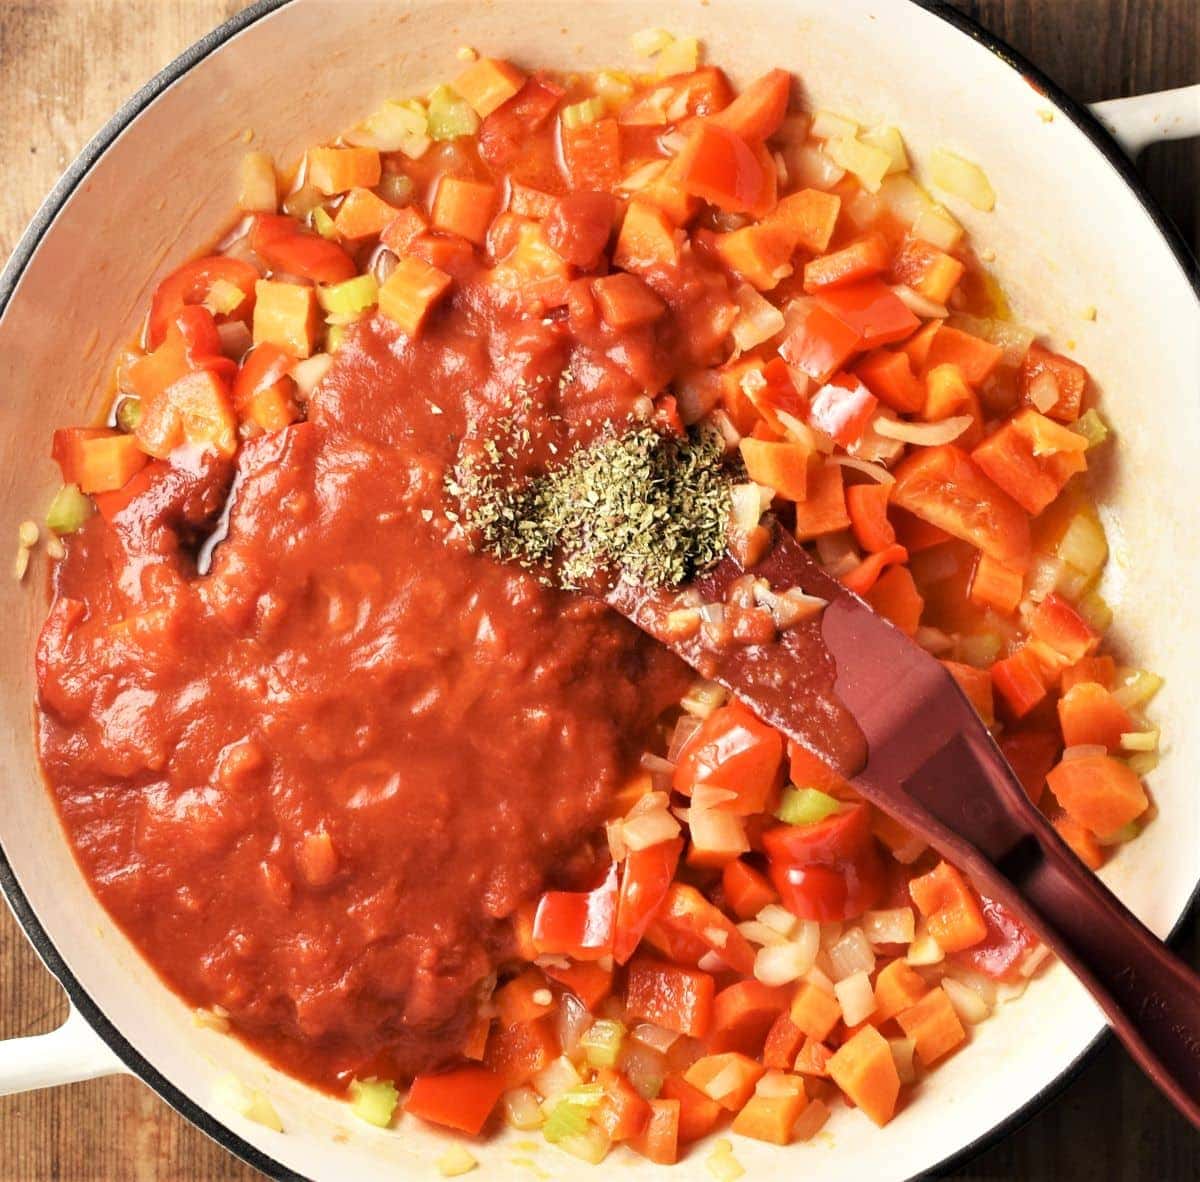 Chopped vegetables and tomato puree in white shallow pan with red spatula.